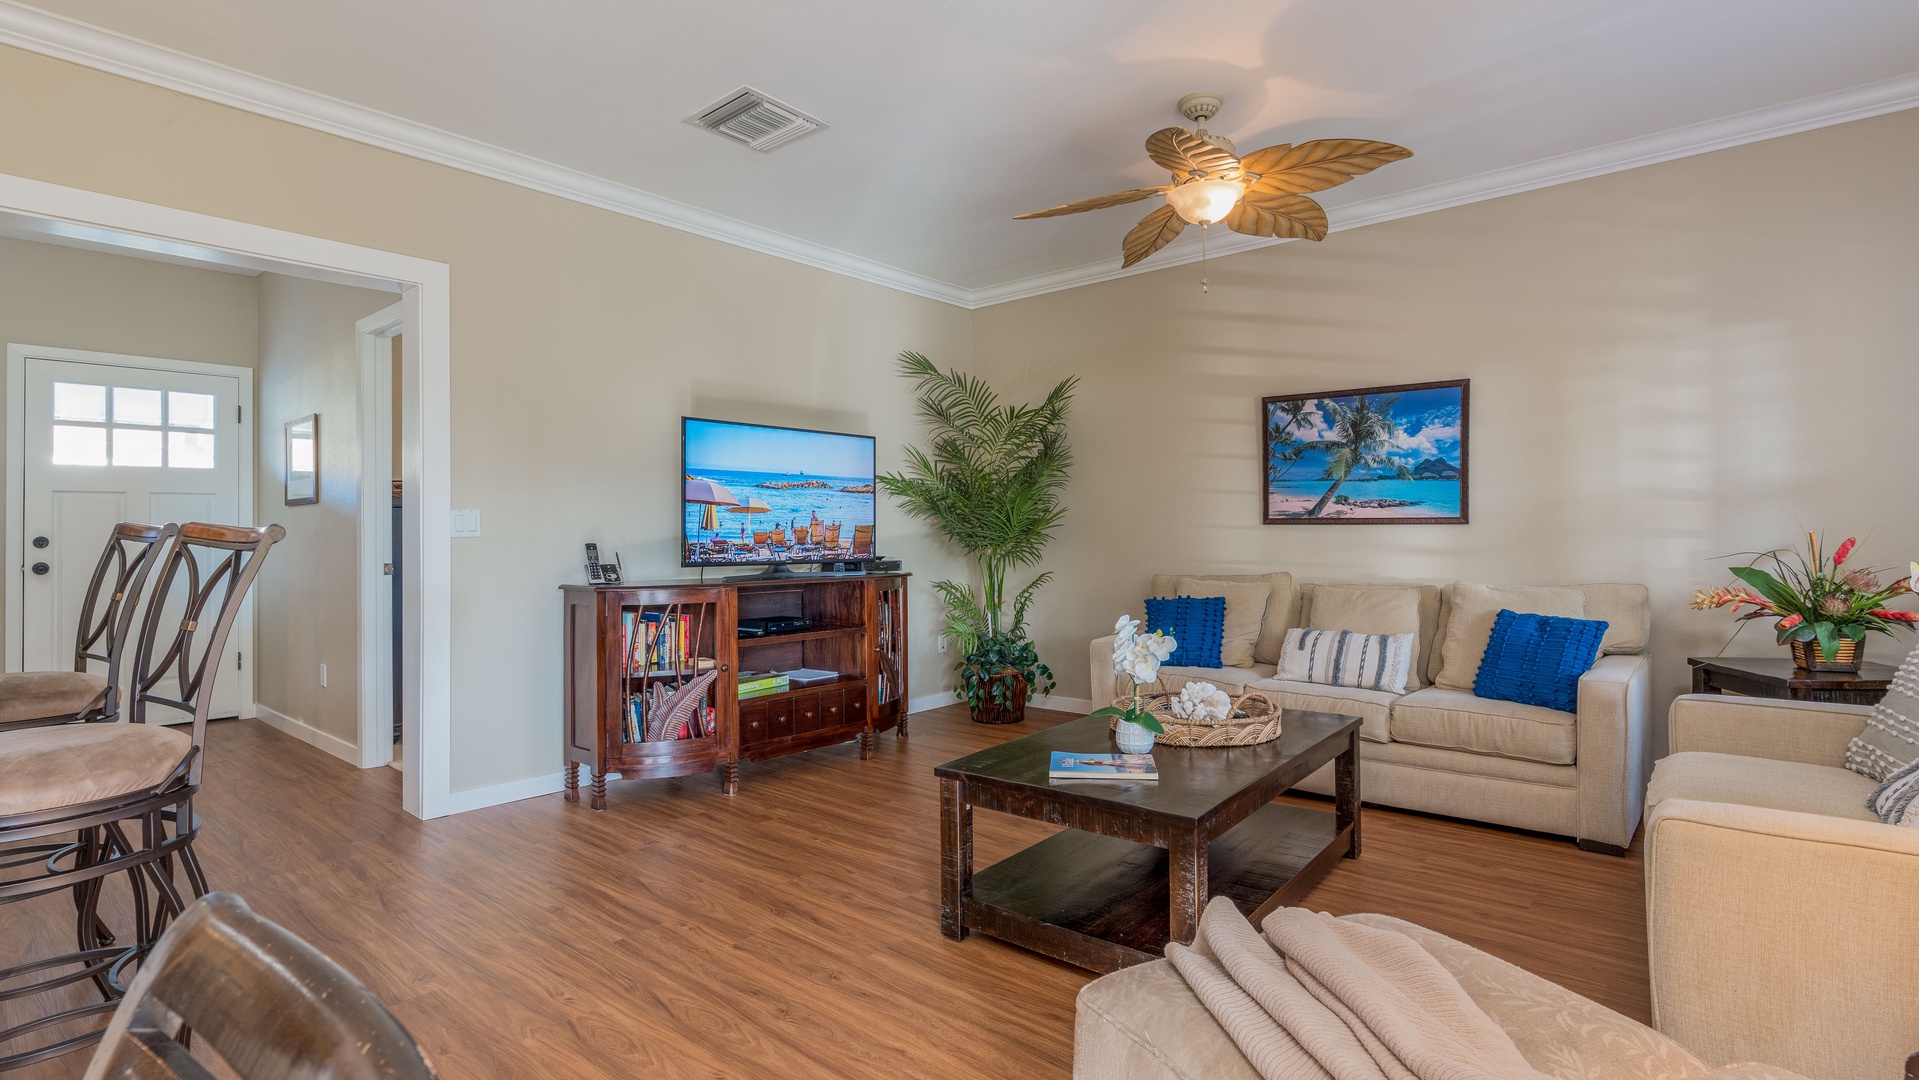 Kapolei Vacation Rentals, Coconut Plantation 1194-3 - Sink in to the plush seating in the living room with your favorite book.